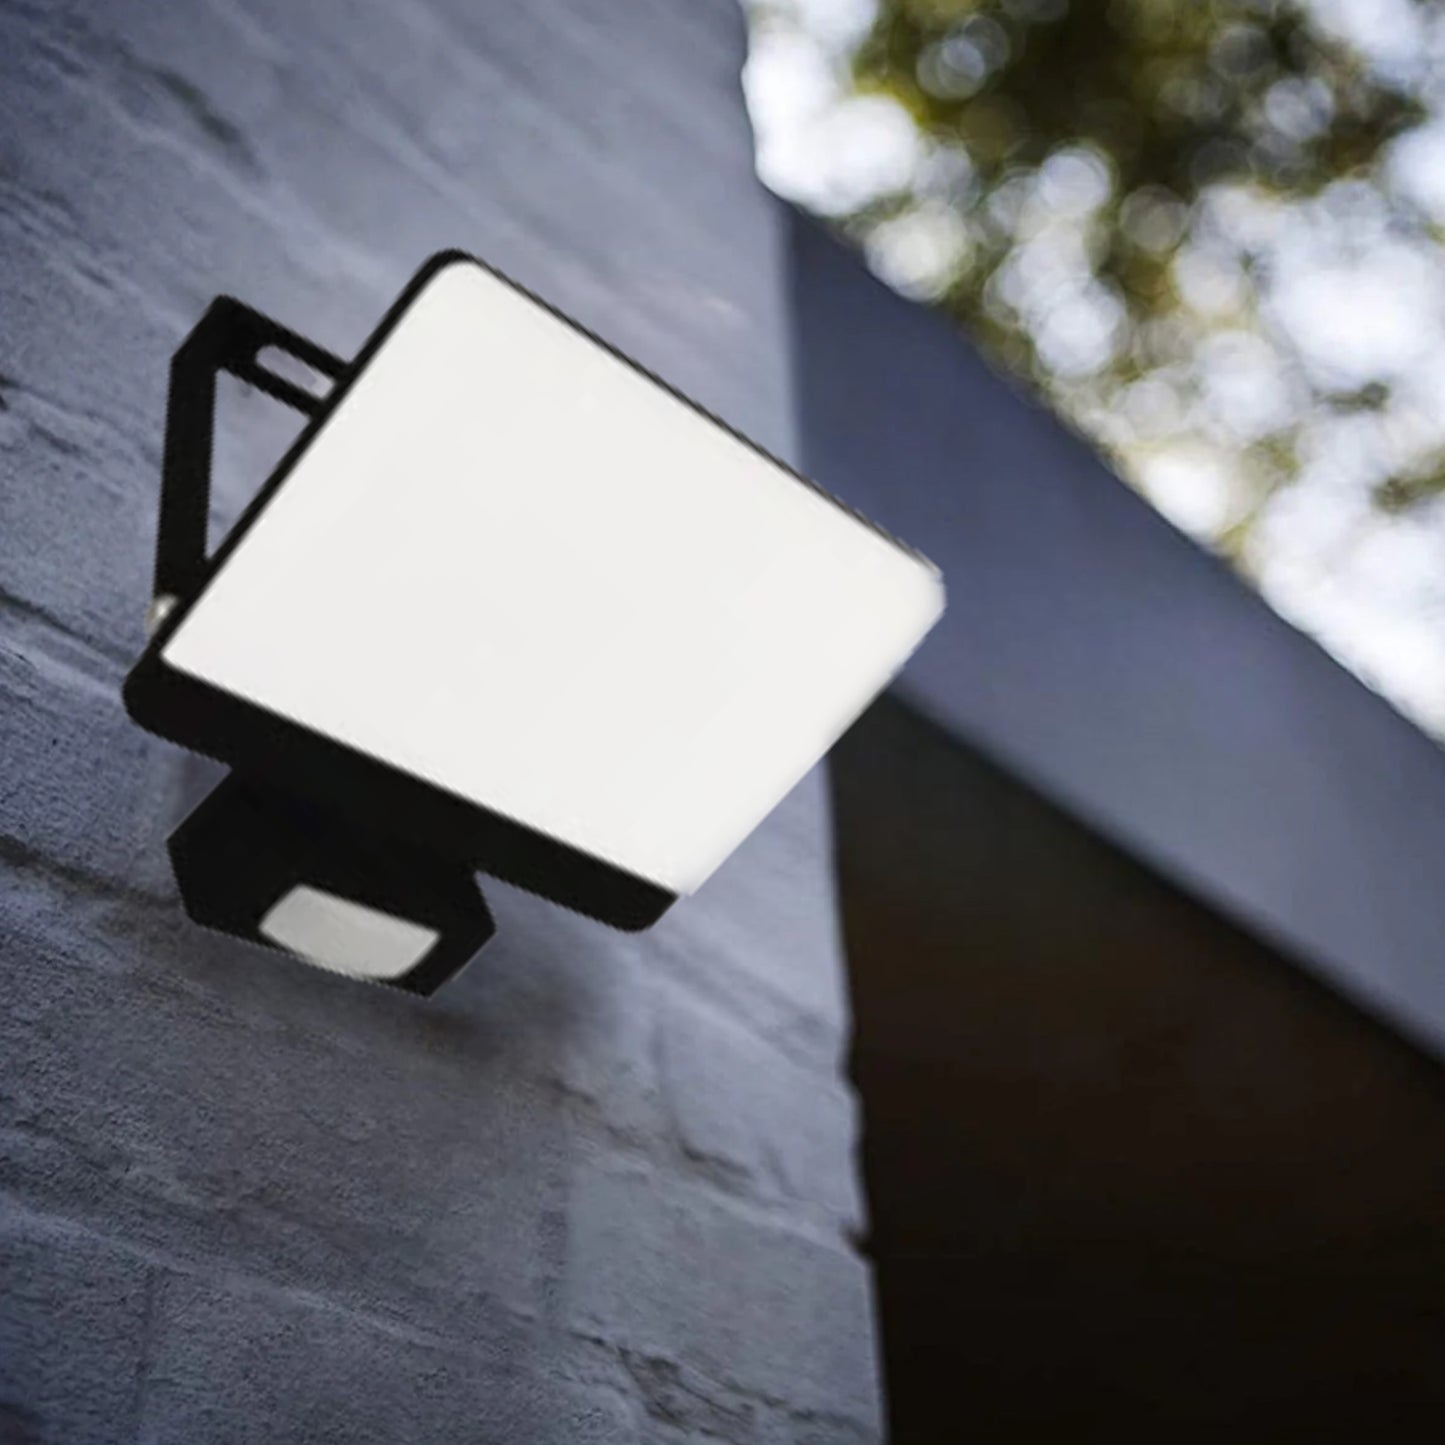 Our Parry LED outdoor wall light with built in PIR motion sensor is a highly efficient light source.  This flood light is a stylish outdoor solution for your home. It has a solid aluminium construction and a polycarbonate cover. The easily adjustable design of this outdoor flood light allows it to be used functionally for lighting paths and aesthetically decorate the walls of your home with a beautiful, bright glow